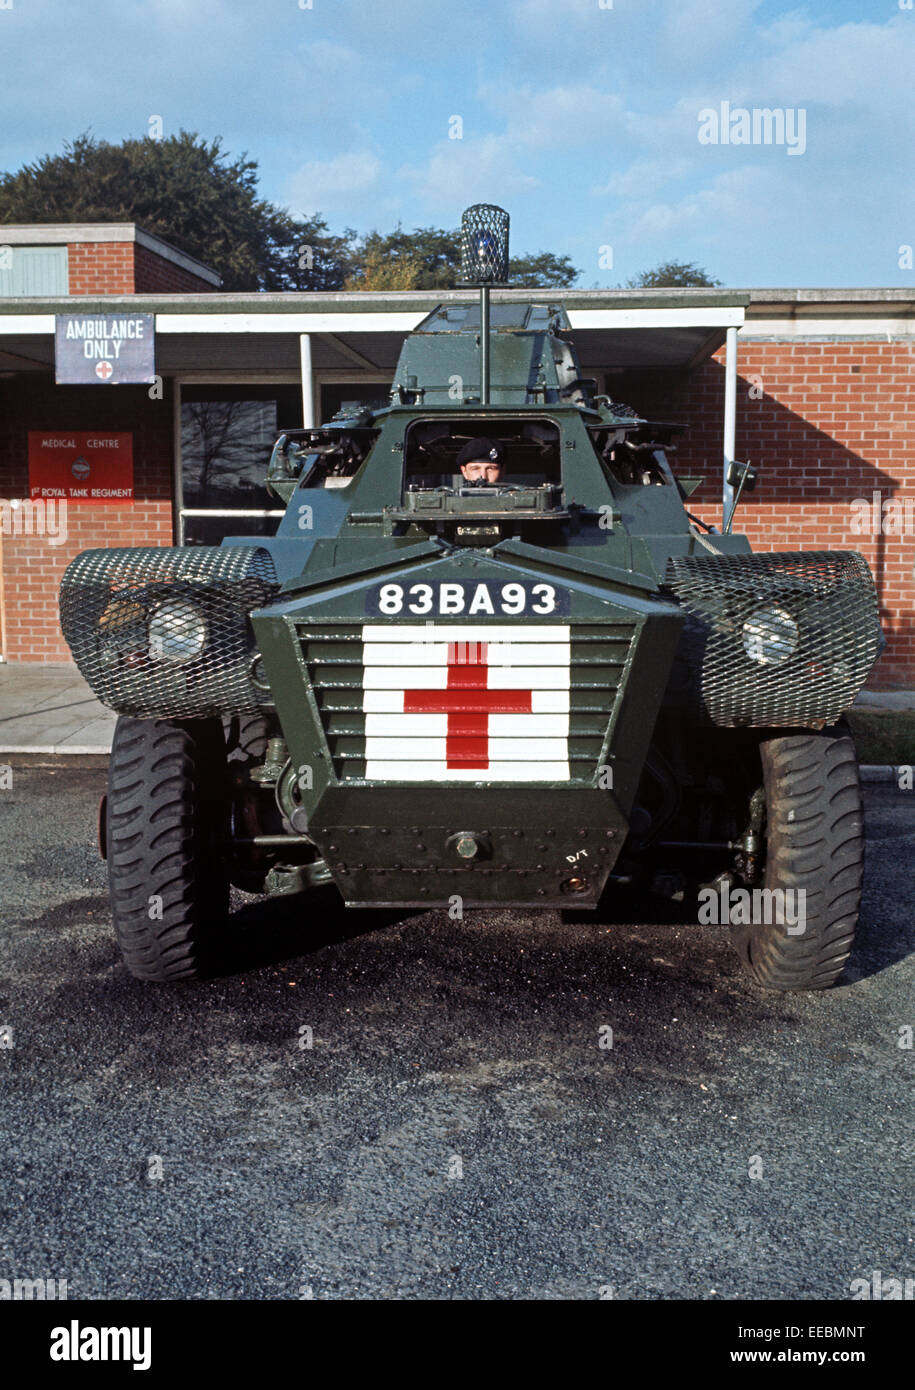 WEAPONS OF ULSTER - FEBRUARY 1972. British Army Saracen Ambulance during The Troubles, Northern Ireland. Stock Photo